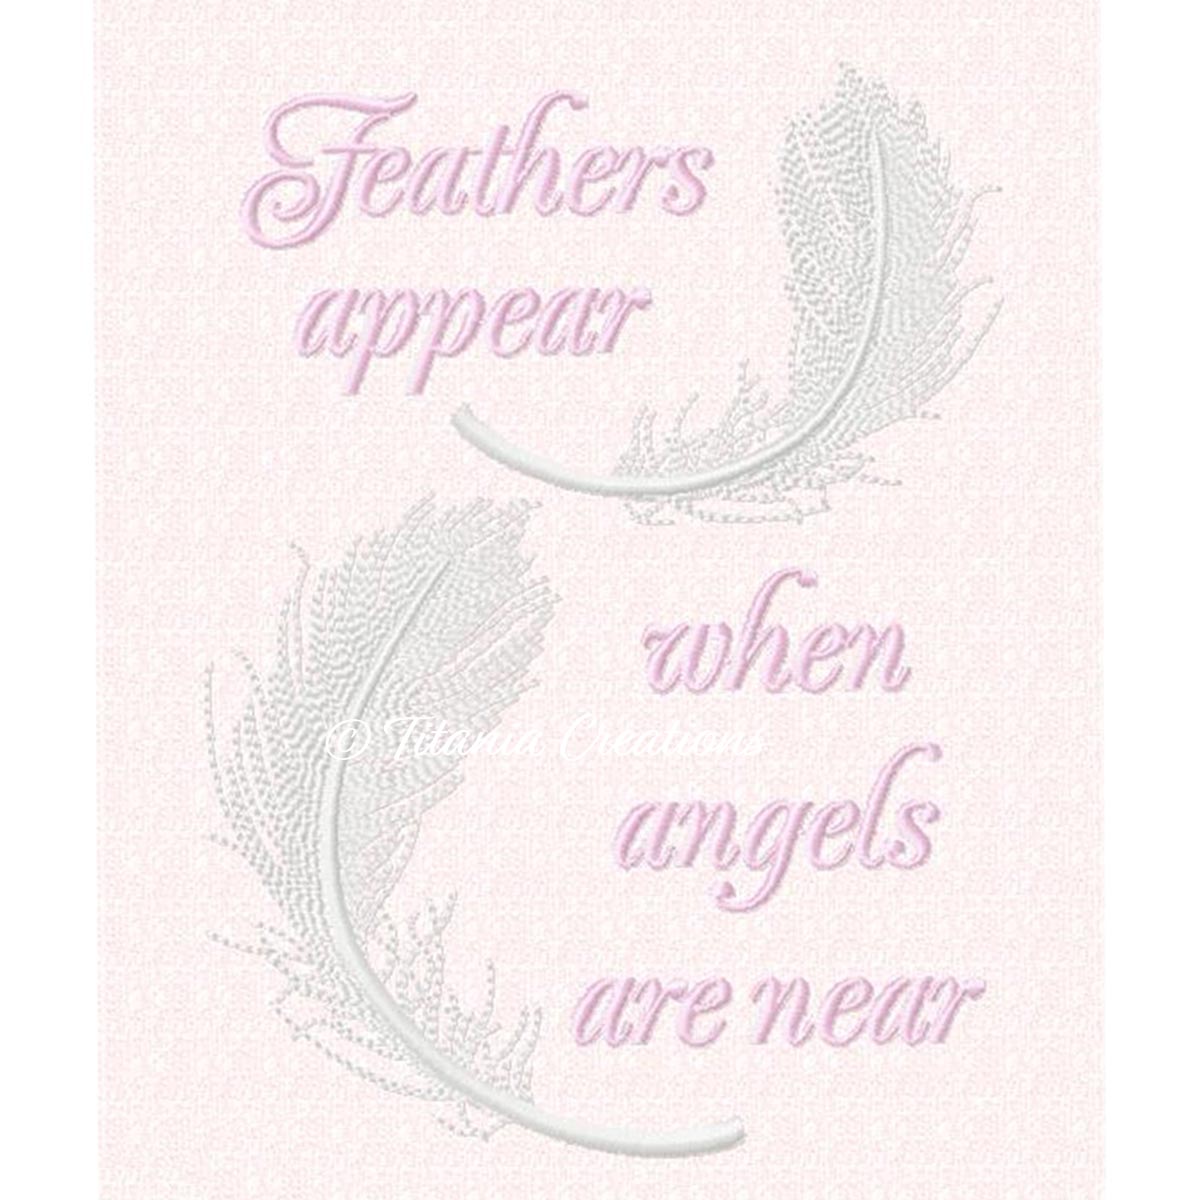 Feathers Appear When Angels Are Near 5x7 6x10 8x12